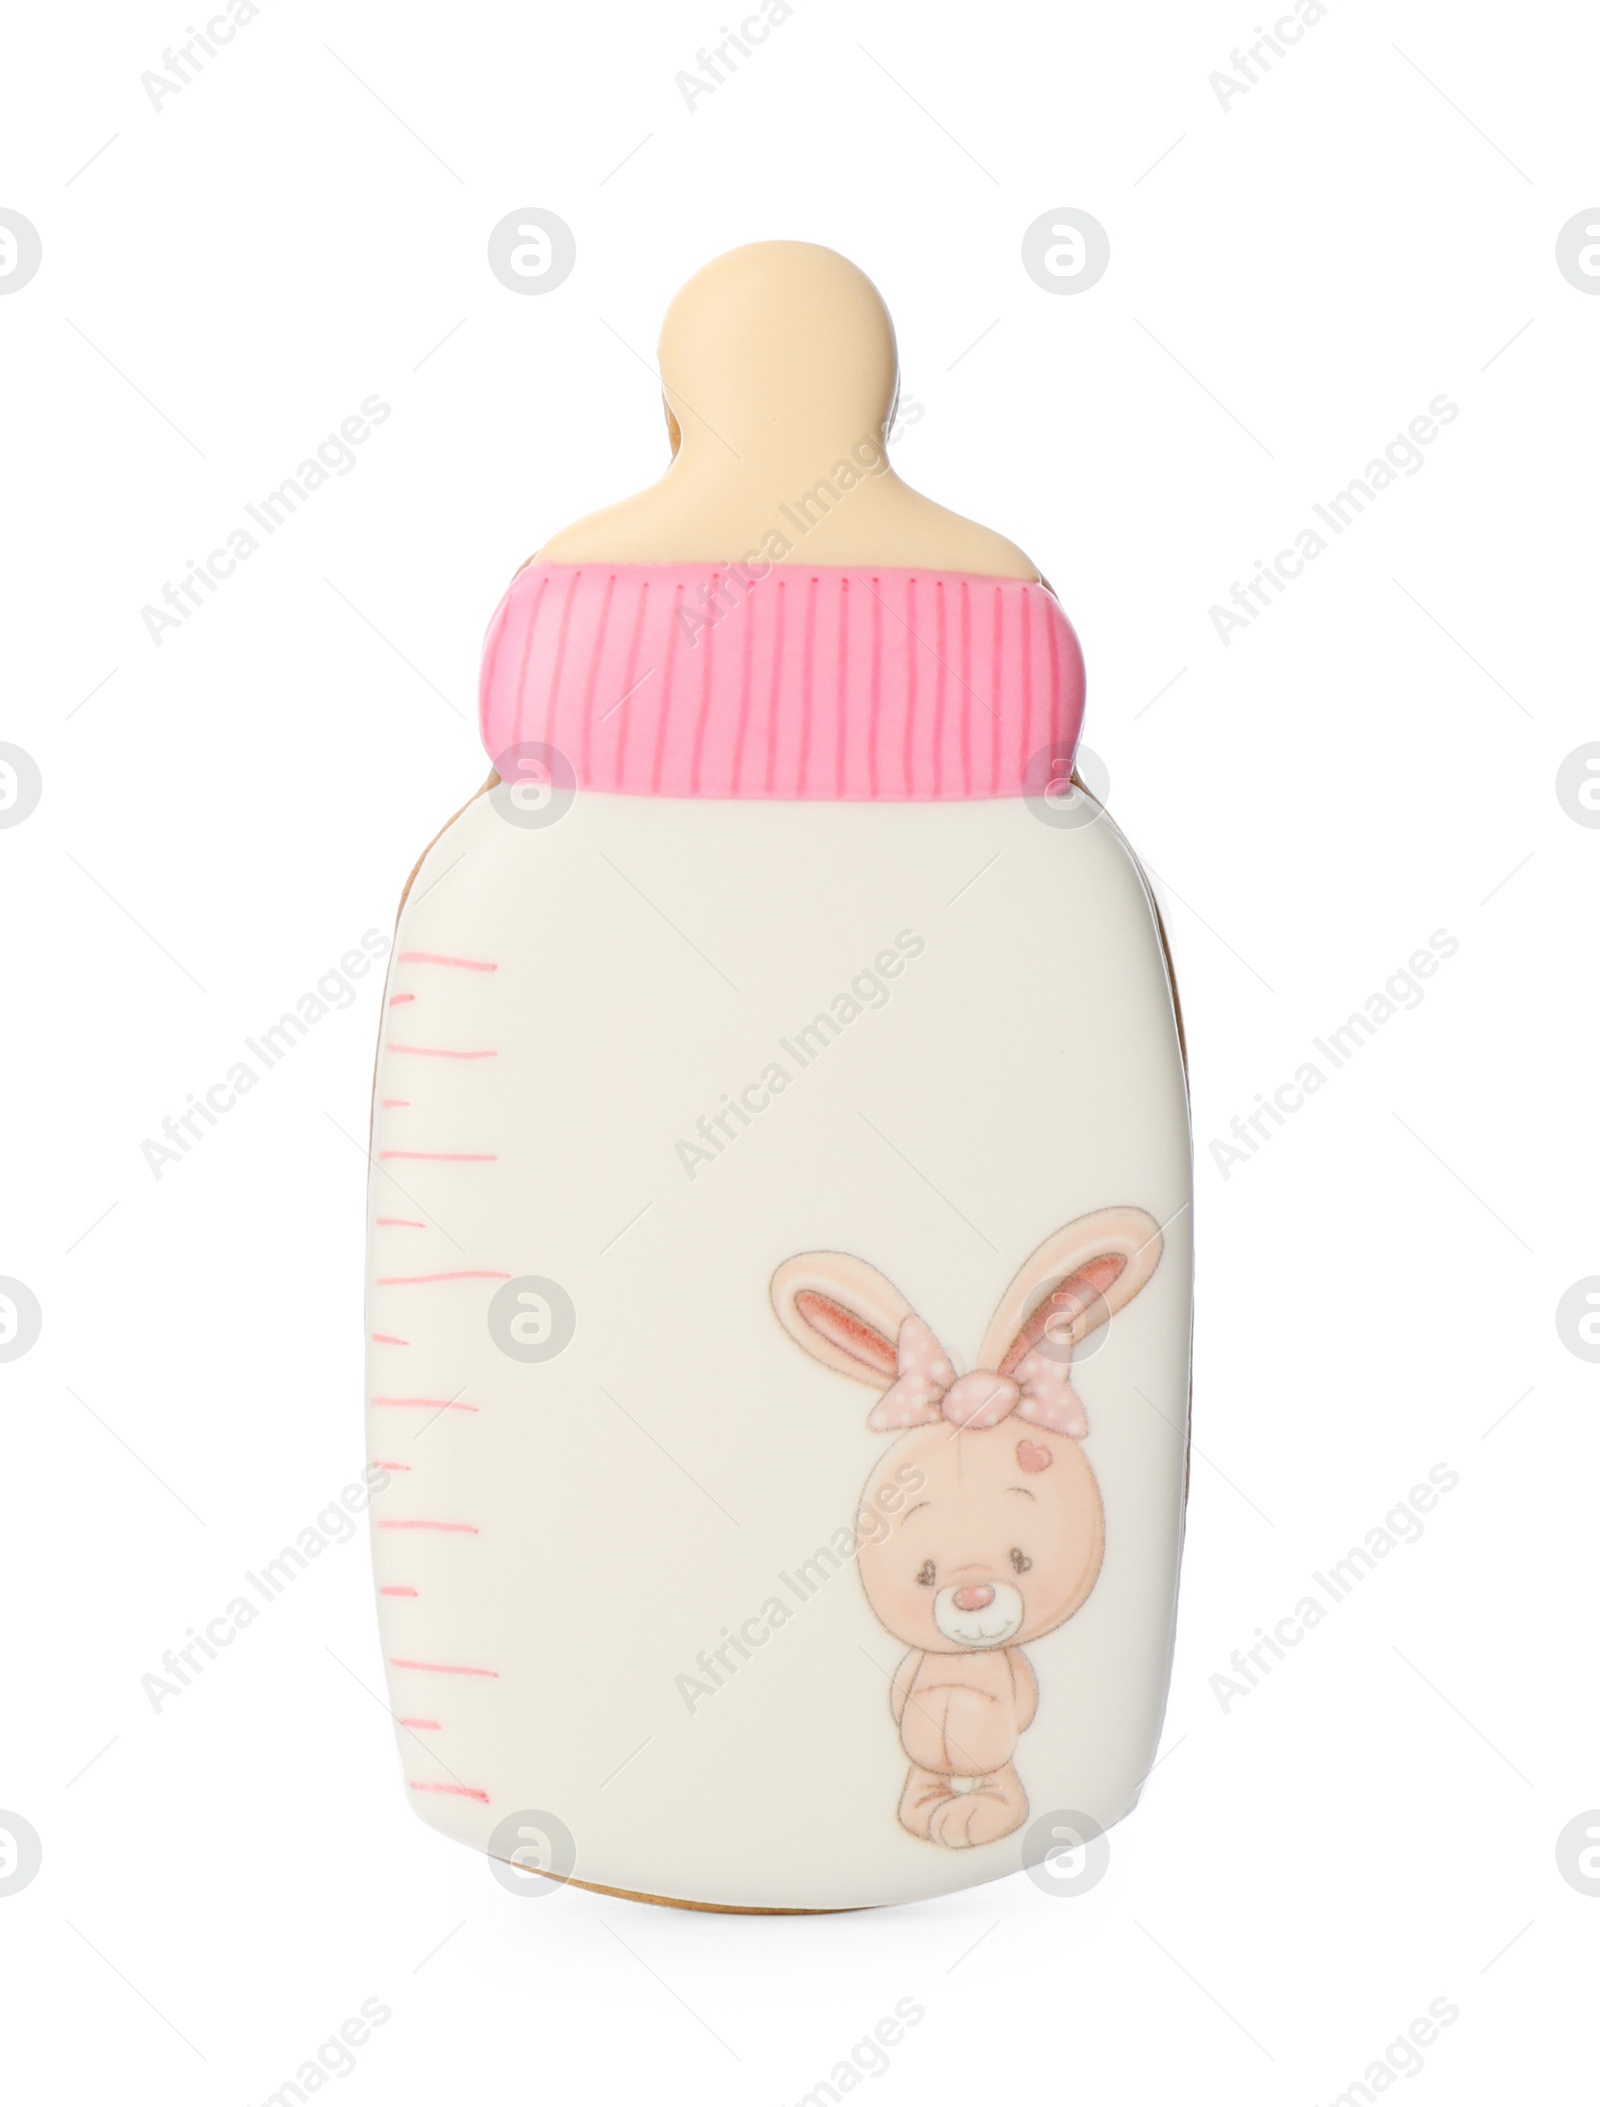 Photo of Tasty cookie in shape of feeding bottle isolated on white. Baby shower party